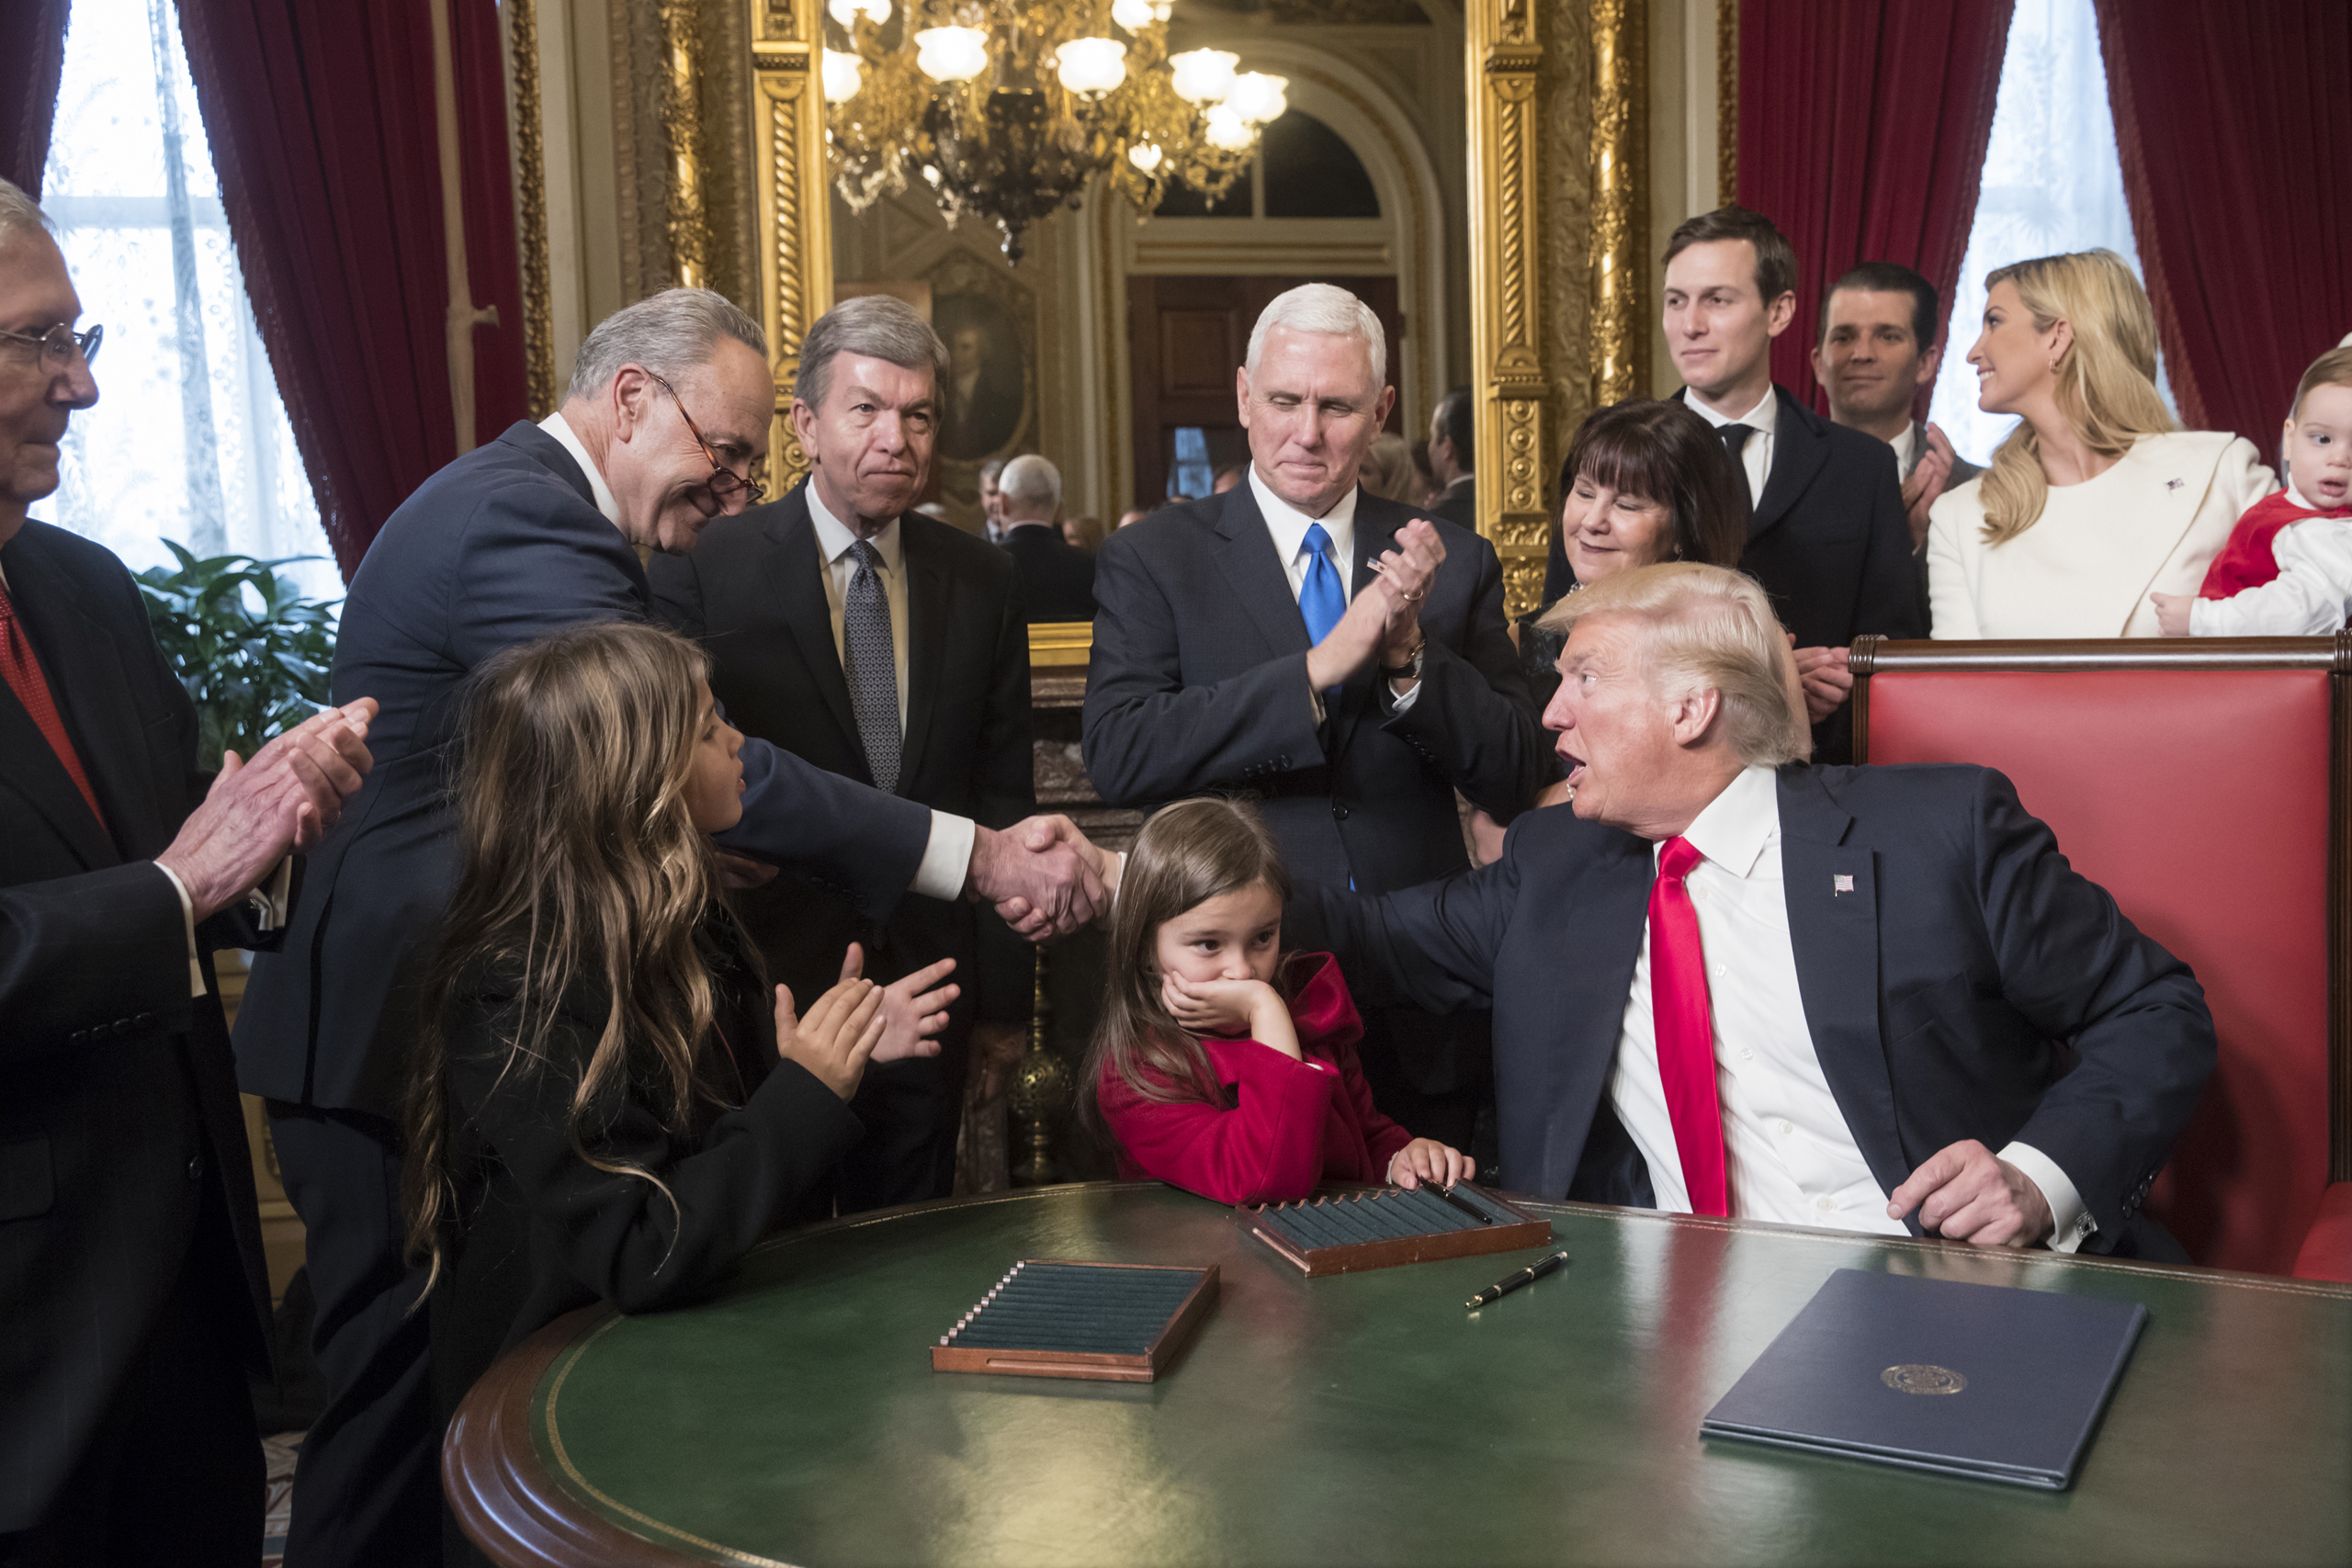 President Donald Trump shakes hands with Senate Minority Leader Charles Schumer of N.Y, as he is joined by the Congressional leadership and his family while he formally signs his cabinet nominations into law, Jan. 20, 2017. (J. Scott Applewhite—AP/Pool)